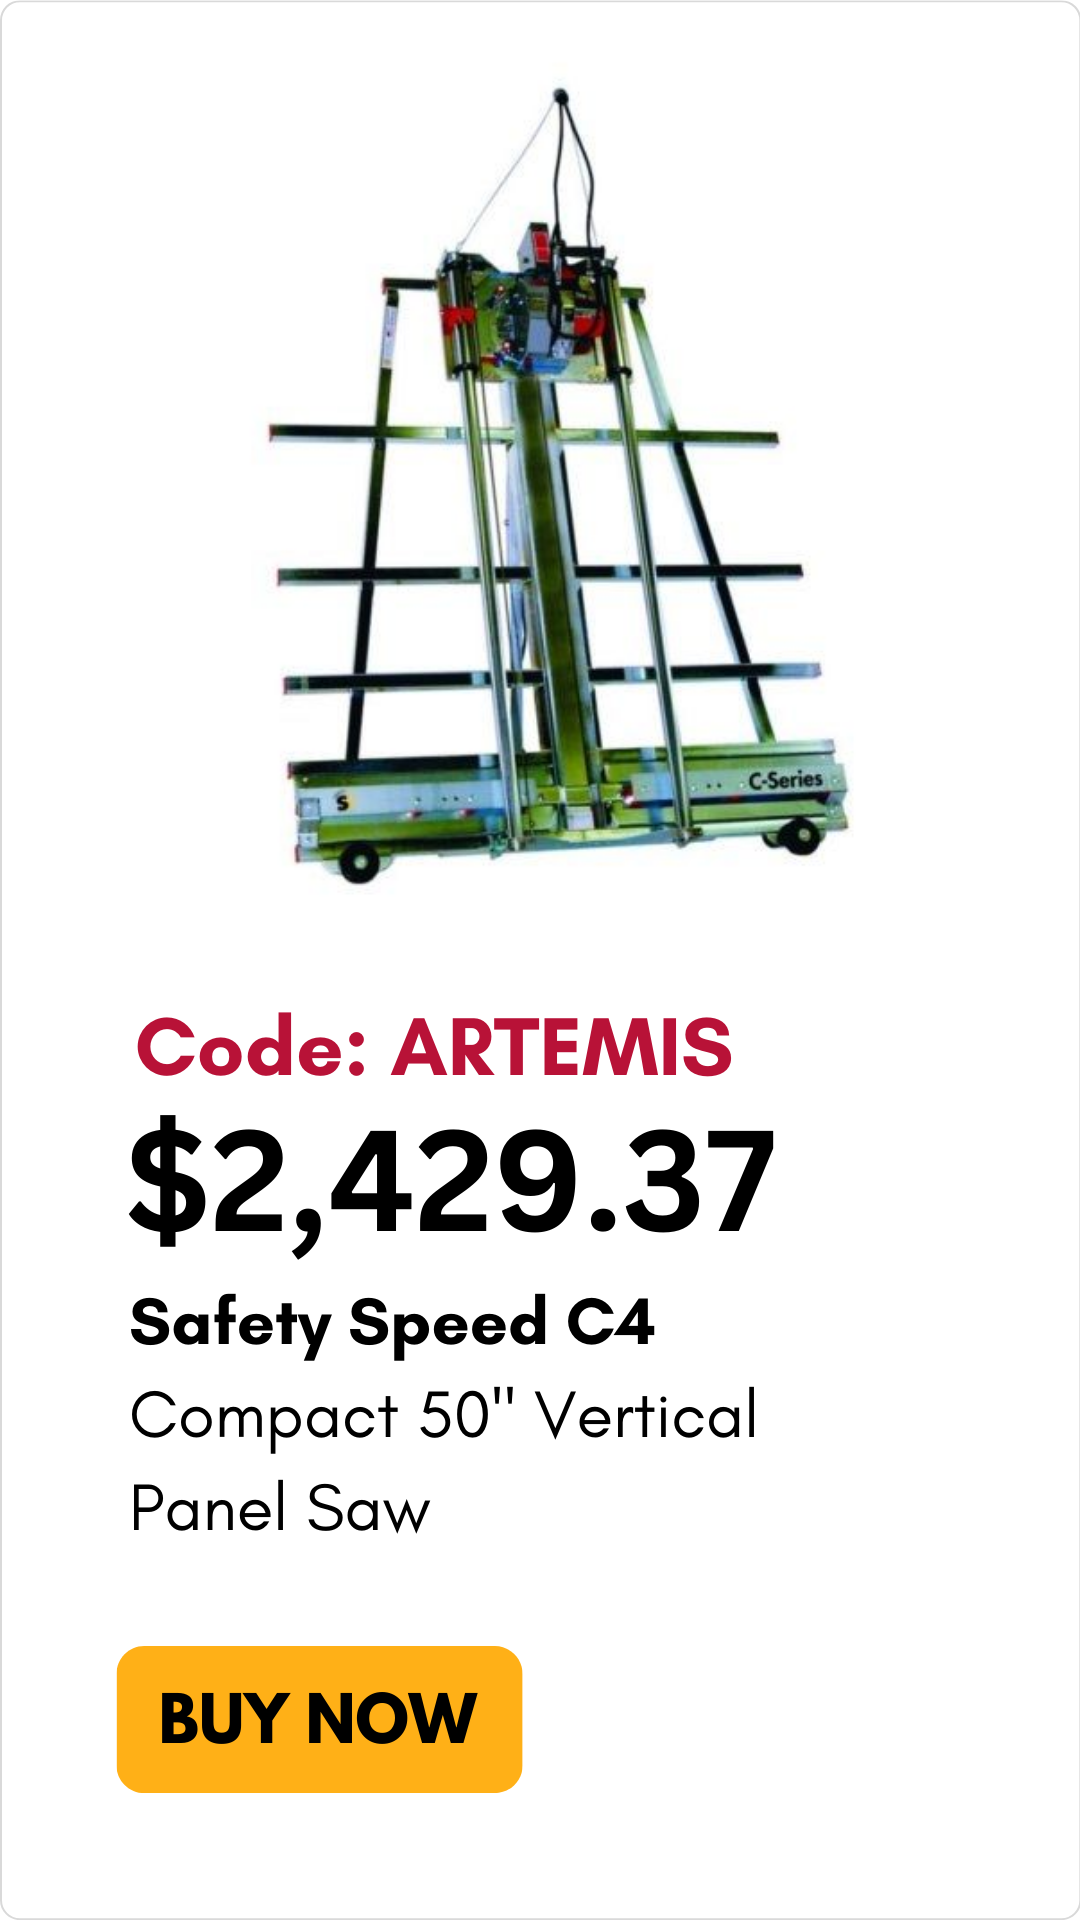 Safety Speed C4 Compact 50" Vertical Panel Saw with Code ARTEMIS